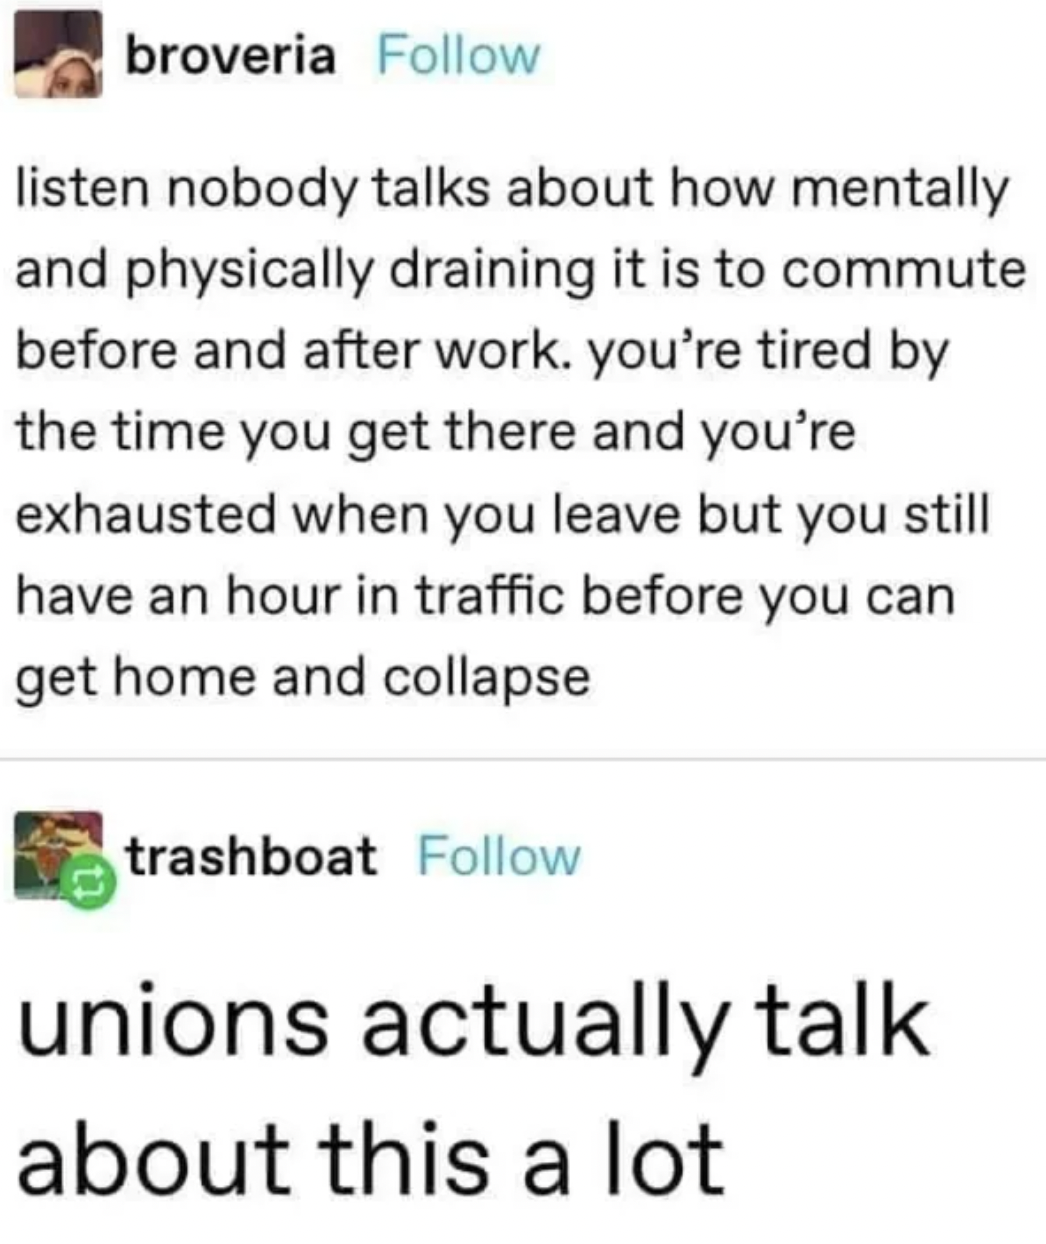 paper - broveria listen nobody talks about how mentally and physically draining it is to commute before and after work. you're tired by the time you get there and you're exhausted when you leave but you still have an hour in traffic before you can get hom